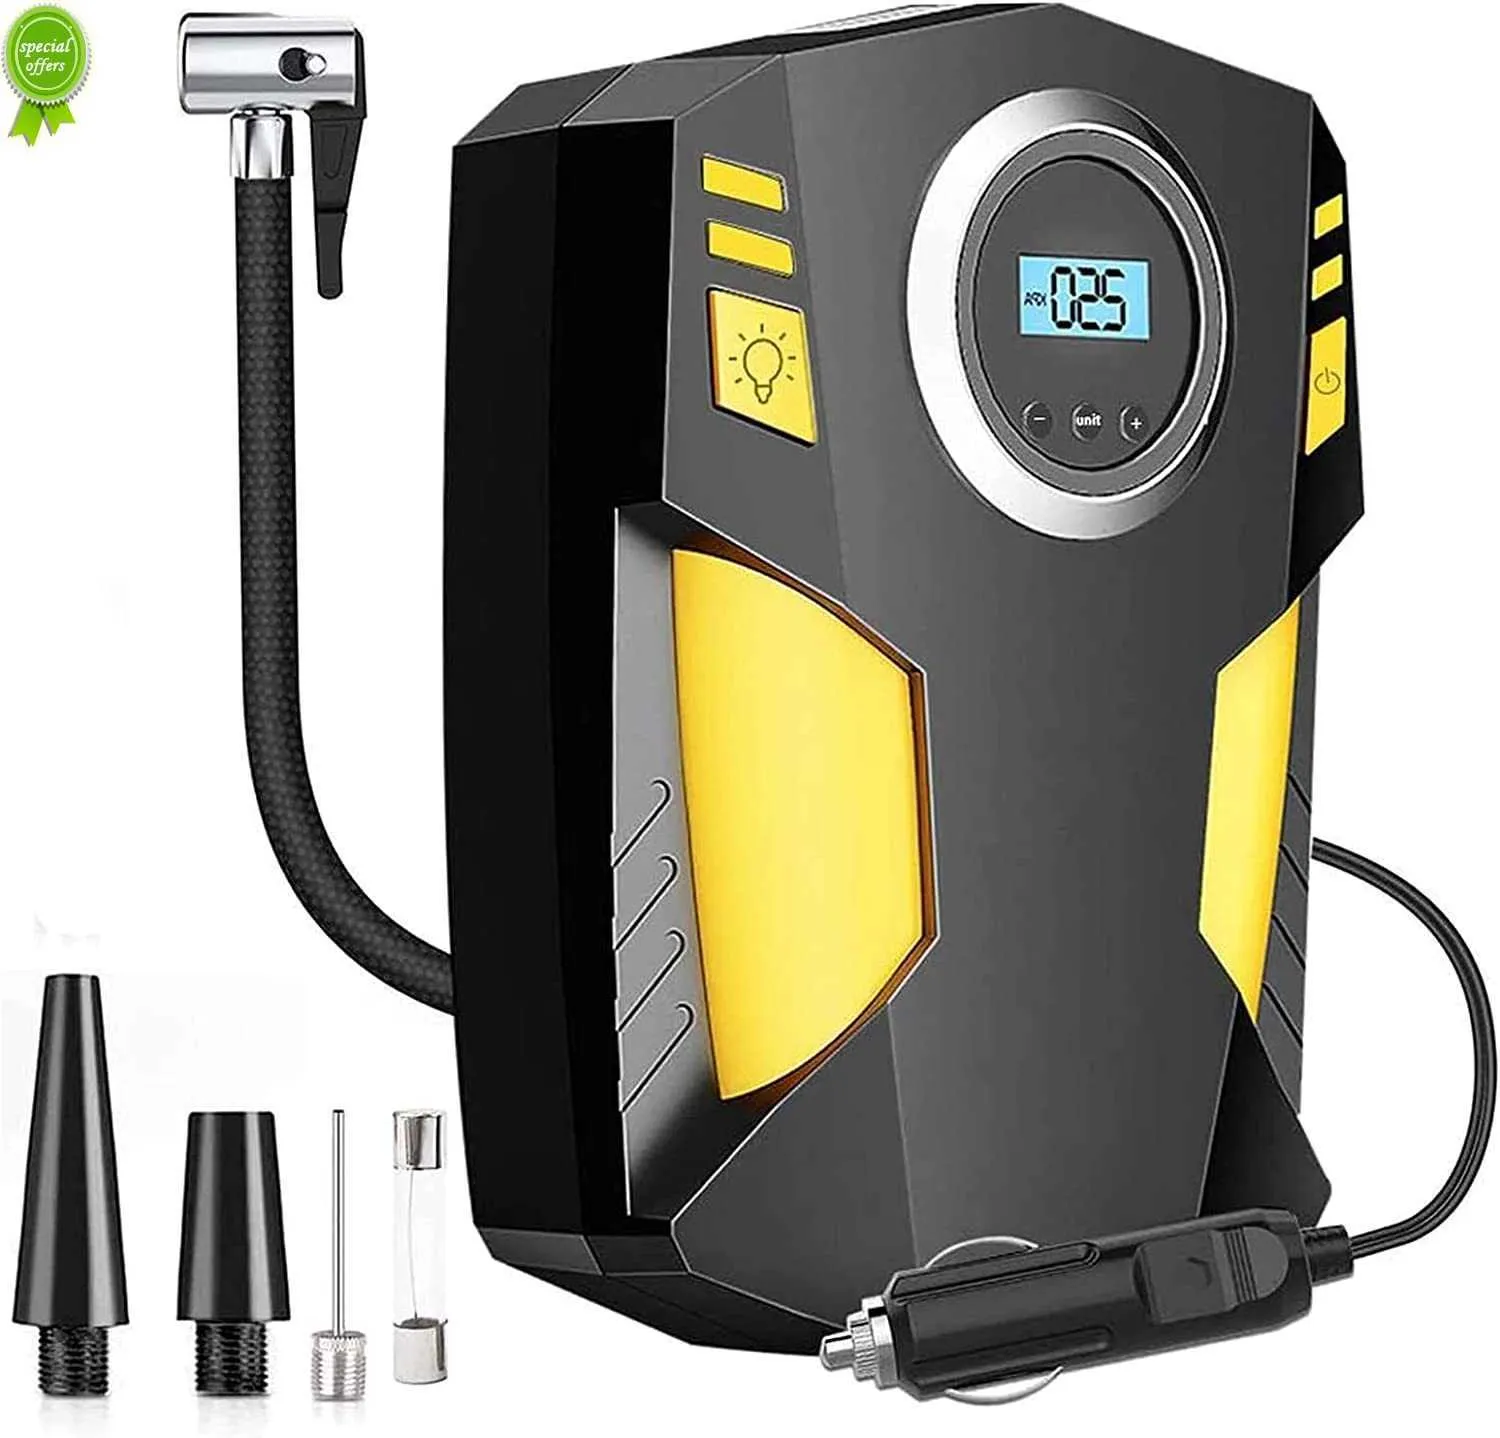 Digital Tyre Inflator Car Tire Pump DC 12V 100PSI Portable Air Compressor for Car SUV Basketballs Inflatables Bicycles Yellow